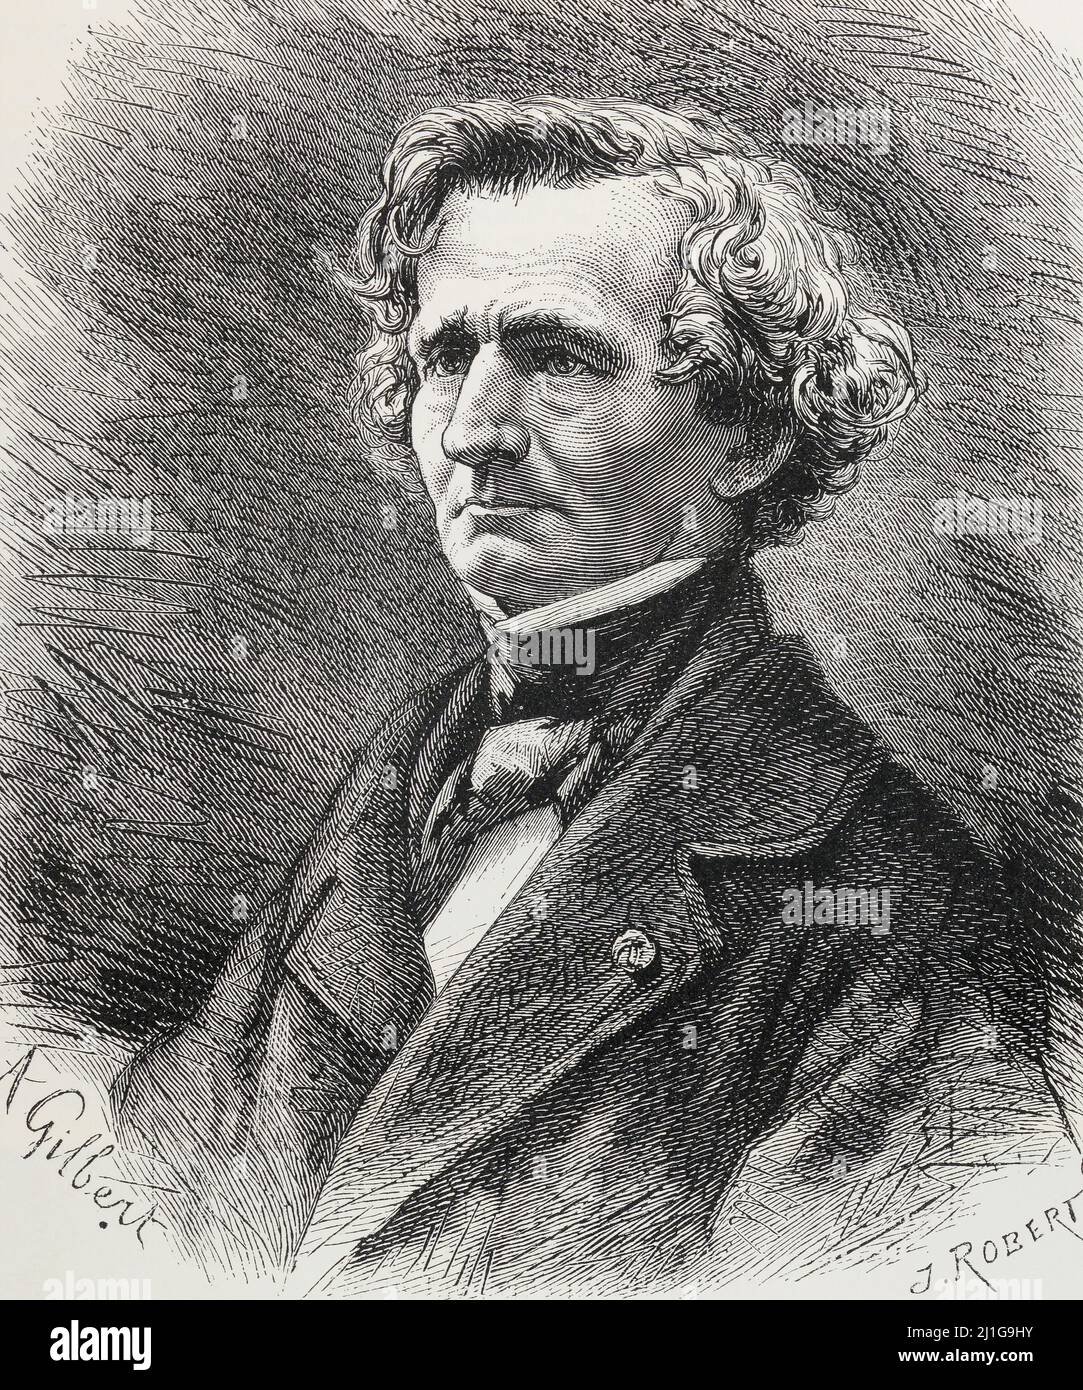 BERLIOZ - Extract from 'L'Illustration Journal Universel' - French illustrated magazine - 1869 Stock Photo